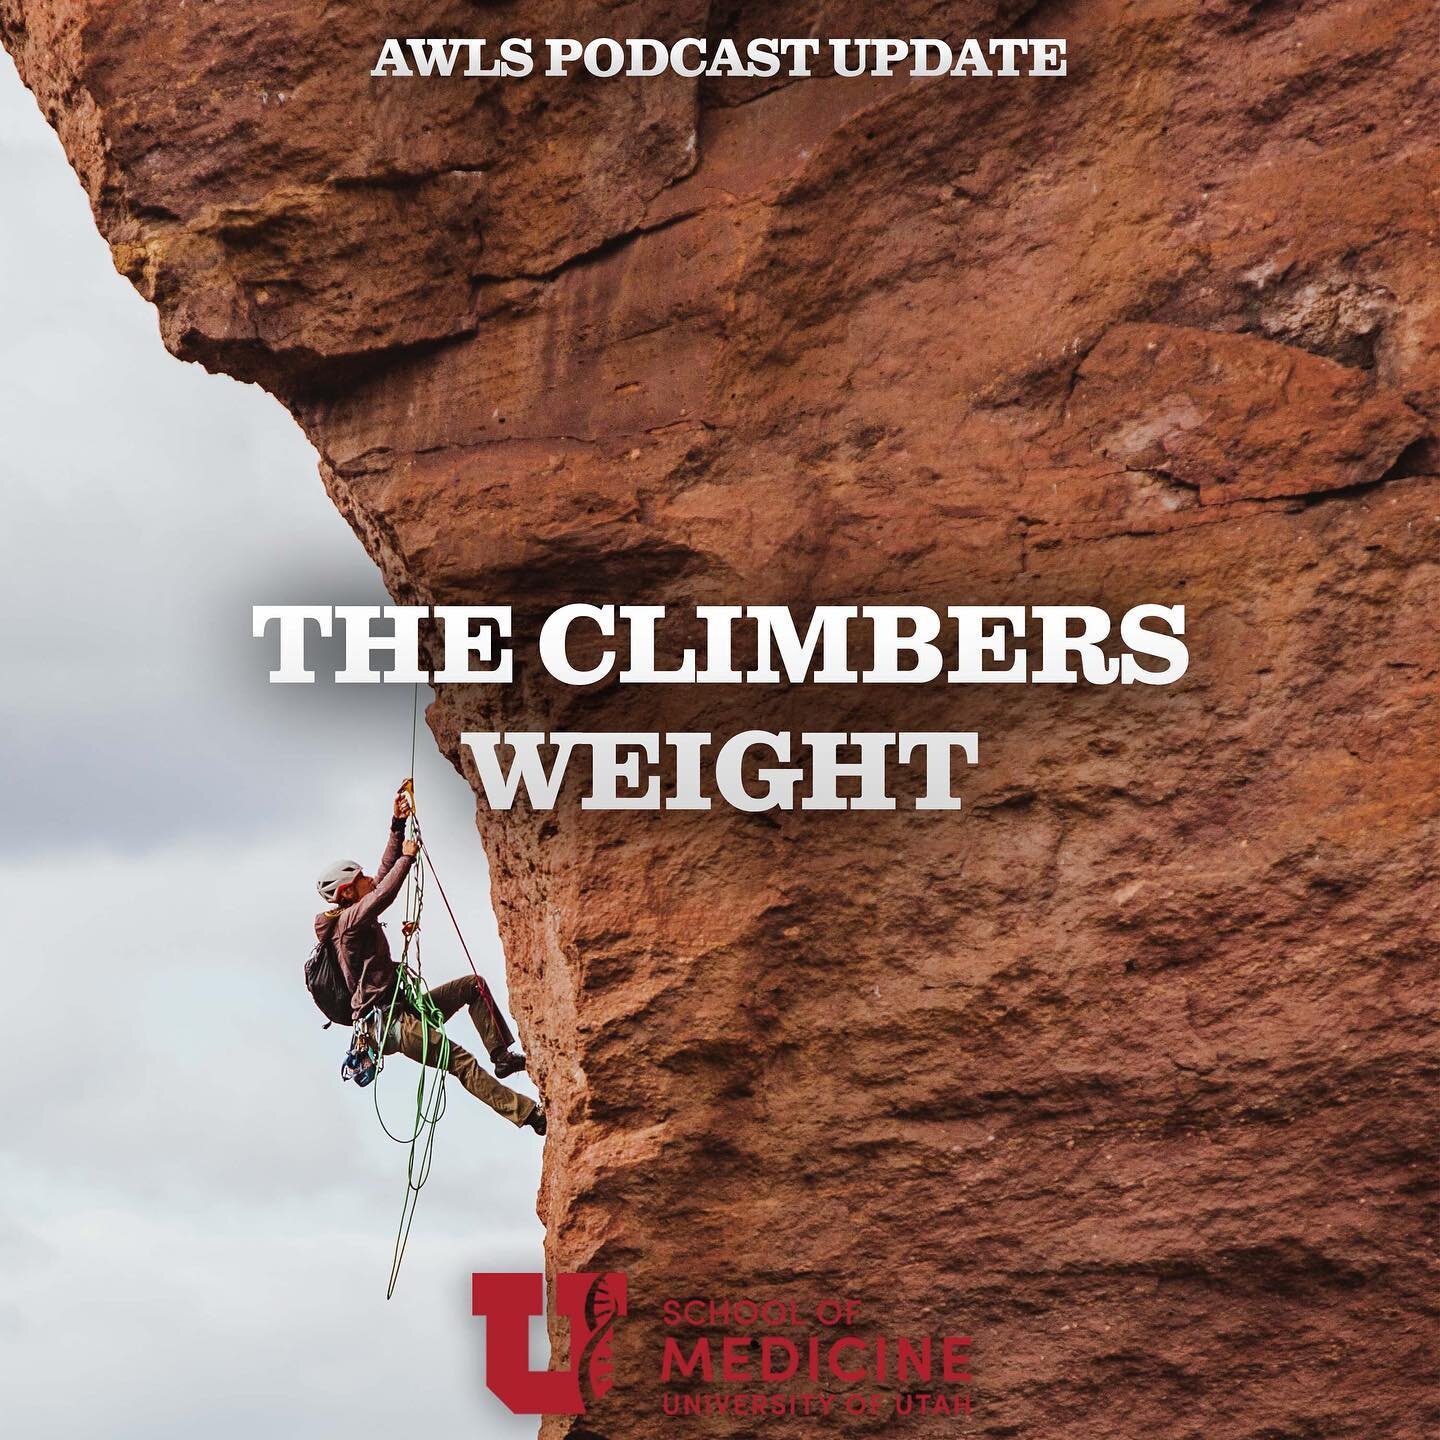 How low do you go? Climbing is called an &lsquo;antigravitational&rsquo; sport.&nbsp;So, the lighter the weight, the easier it is to climb.&nbsp;But some climbers take this to an extreme so that disordered eating becomes a problem. Lighter weight mea